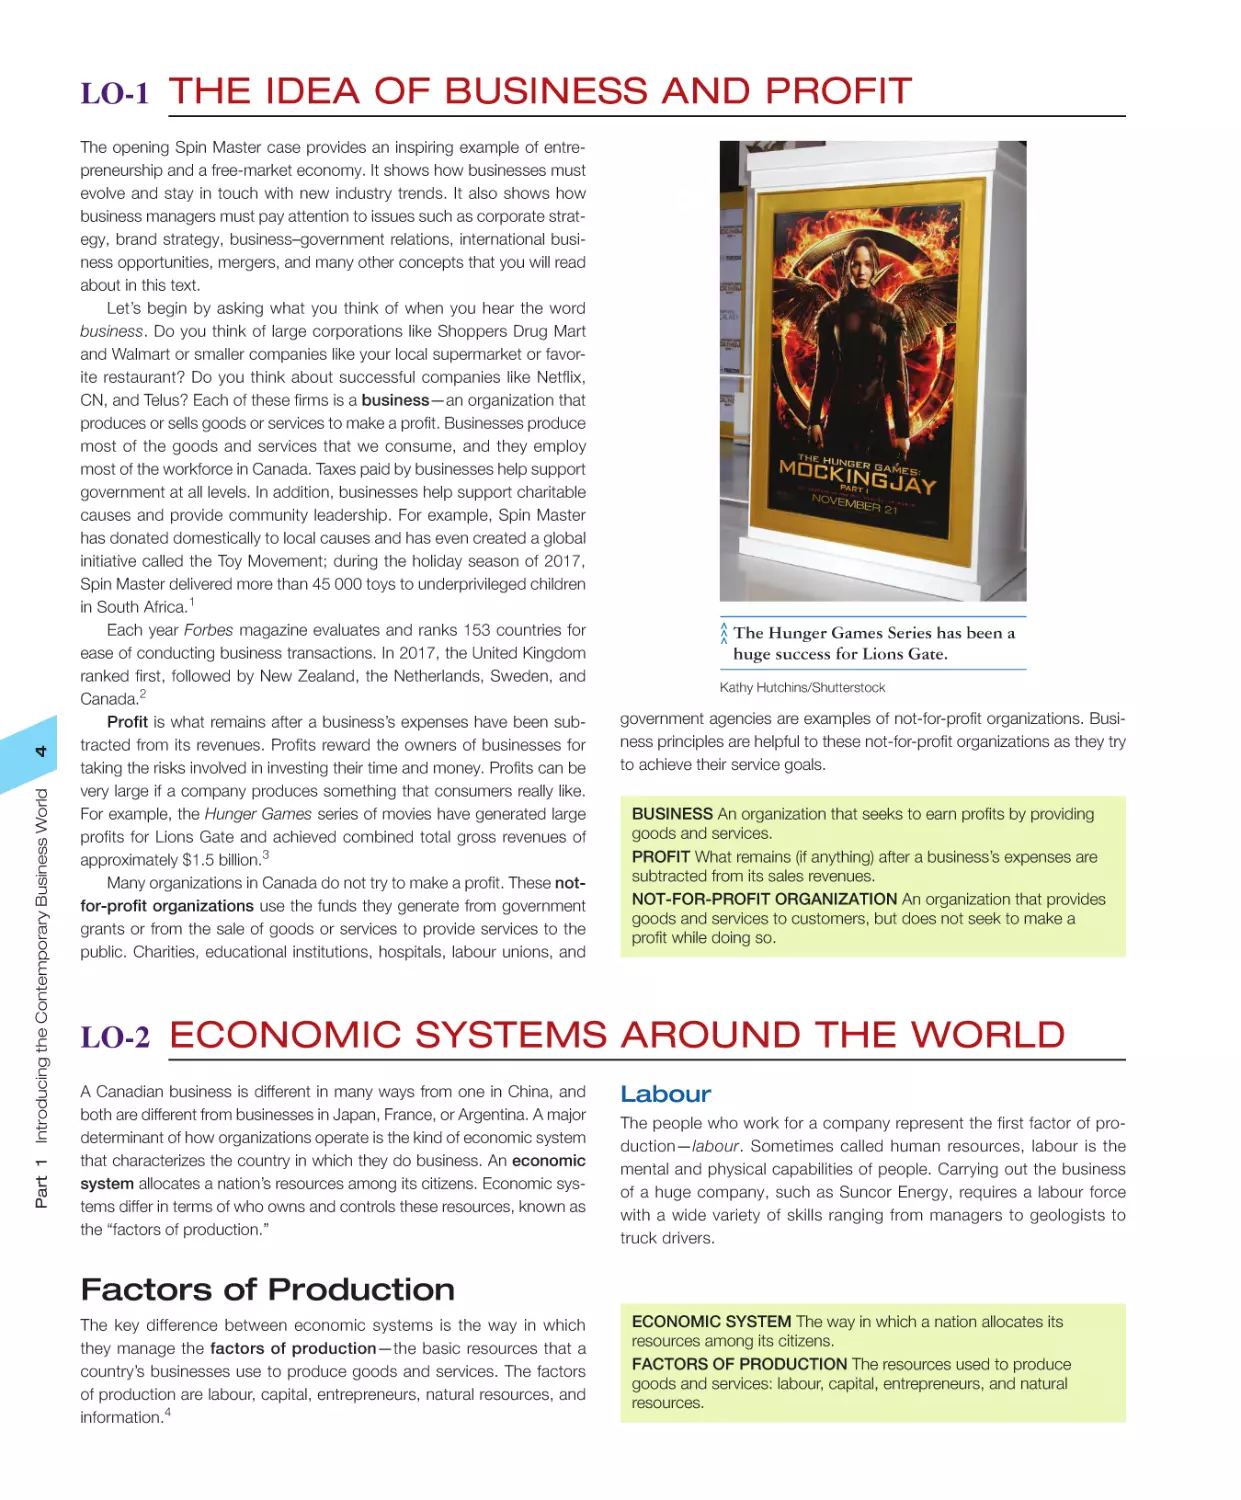 LO‐1 The Idea of Business and Profit
LO‐2 Economic Systems Around the World